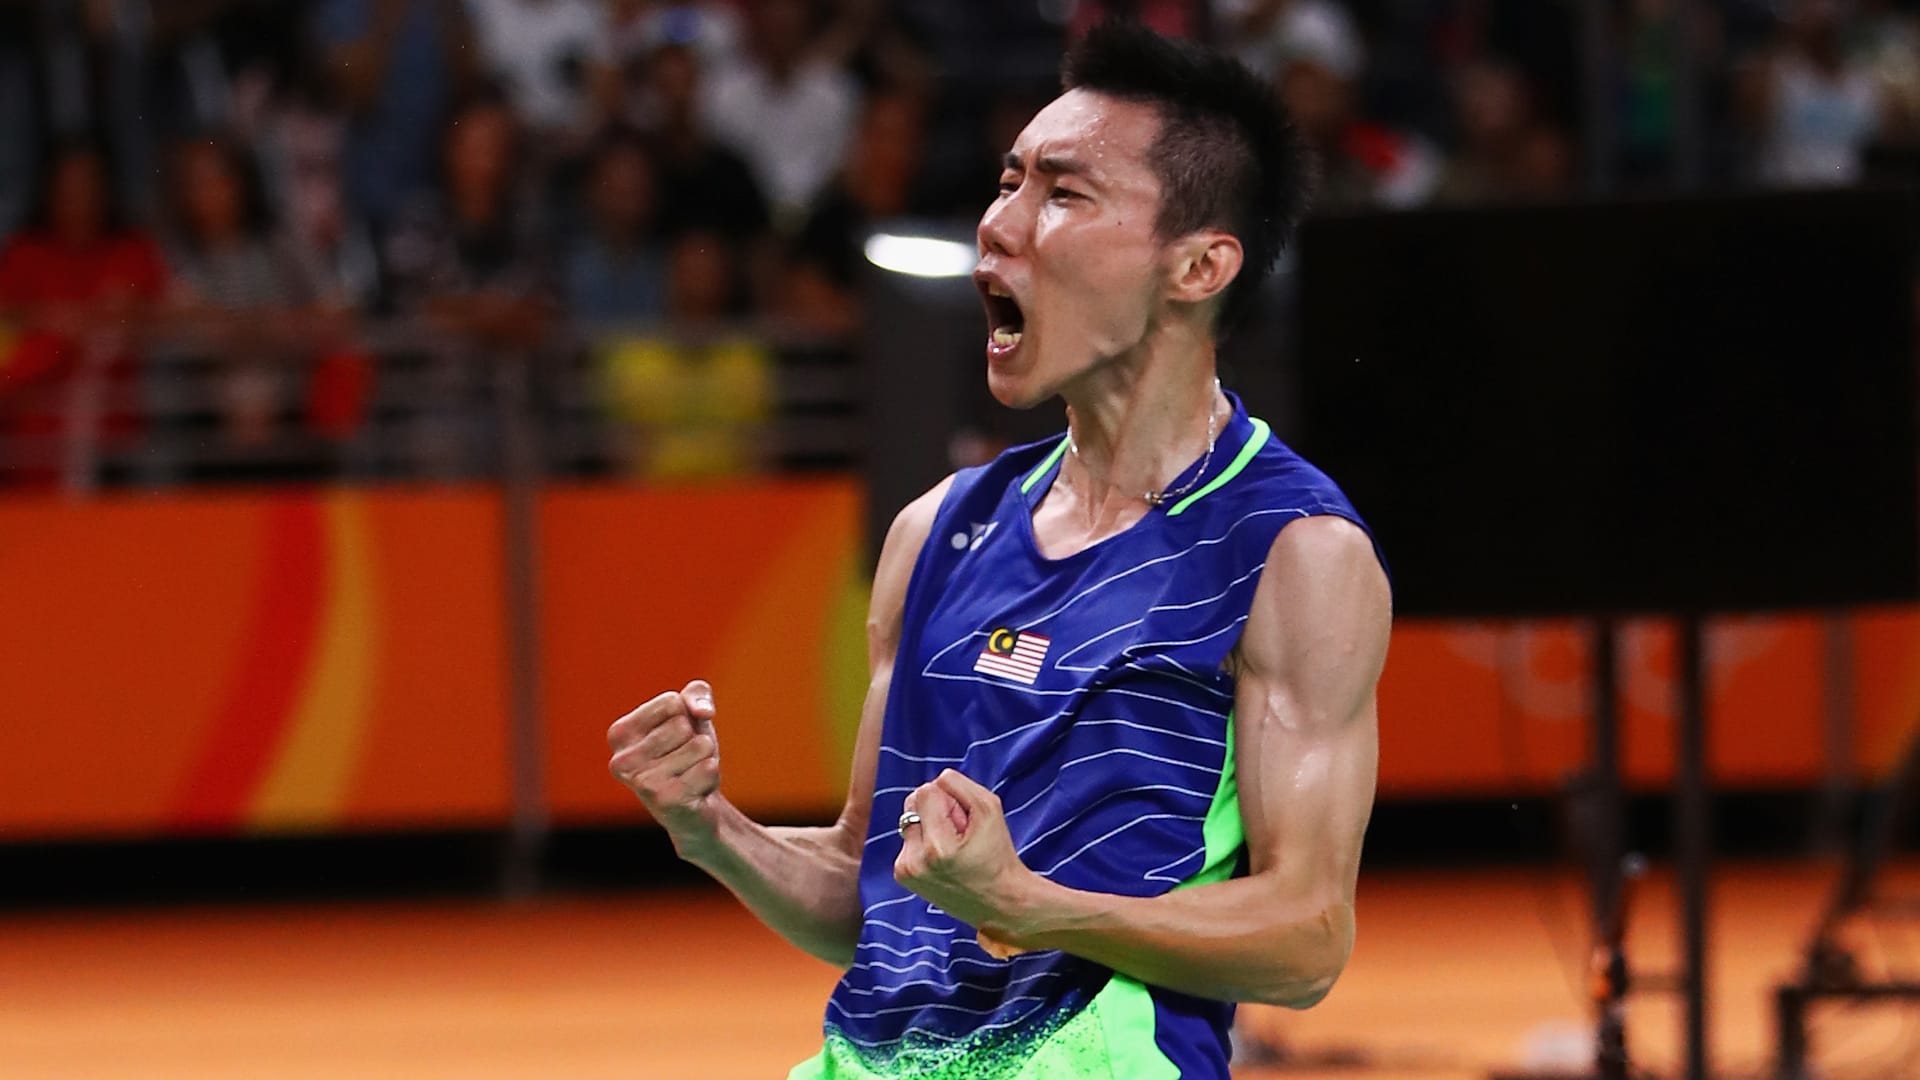 Lee Chong Wei in cancer remission and aiming for Tokyo 2020